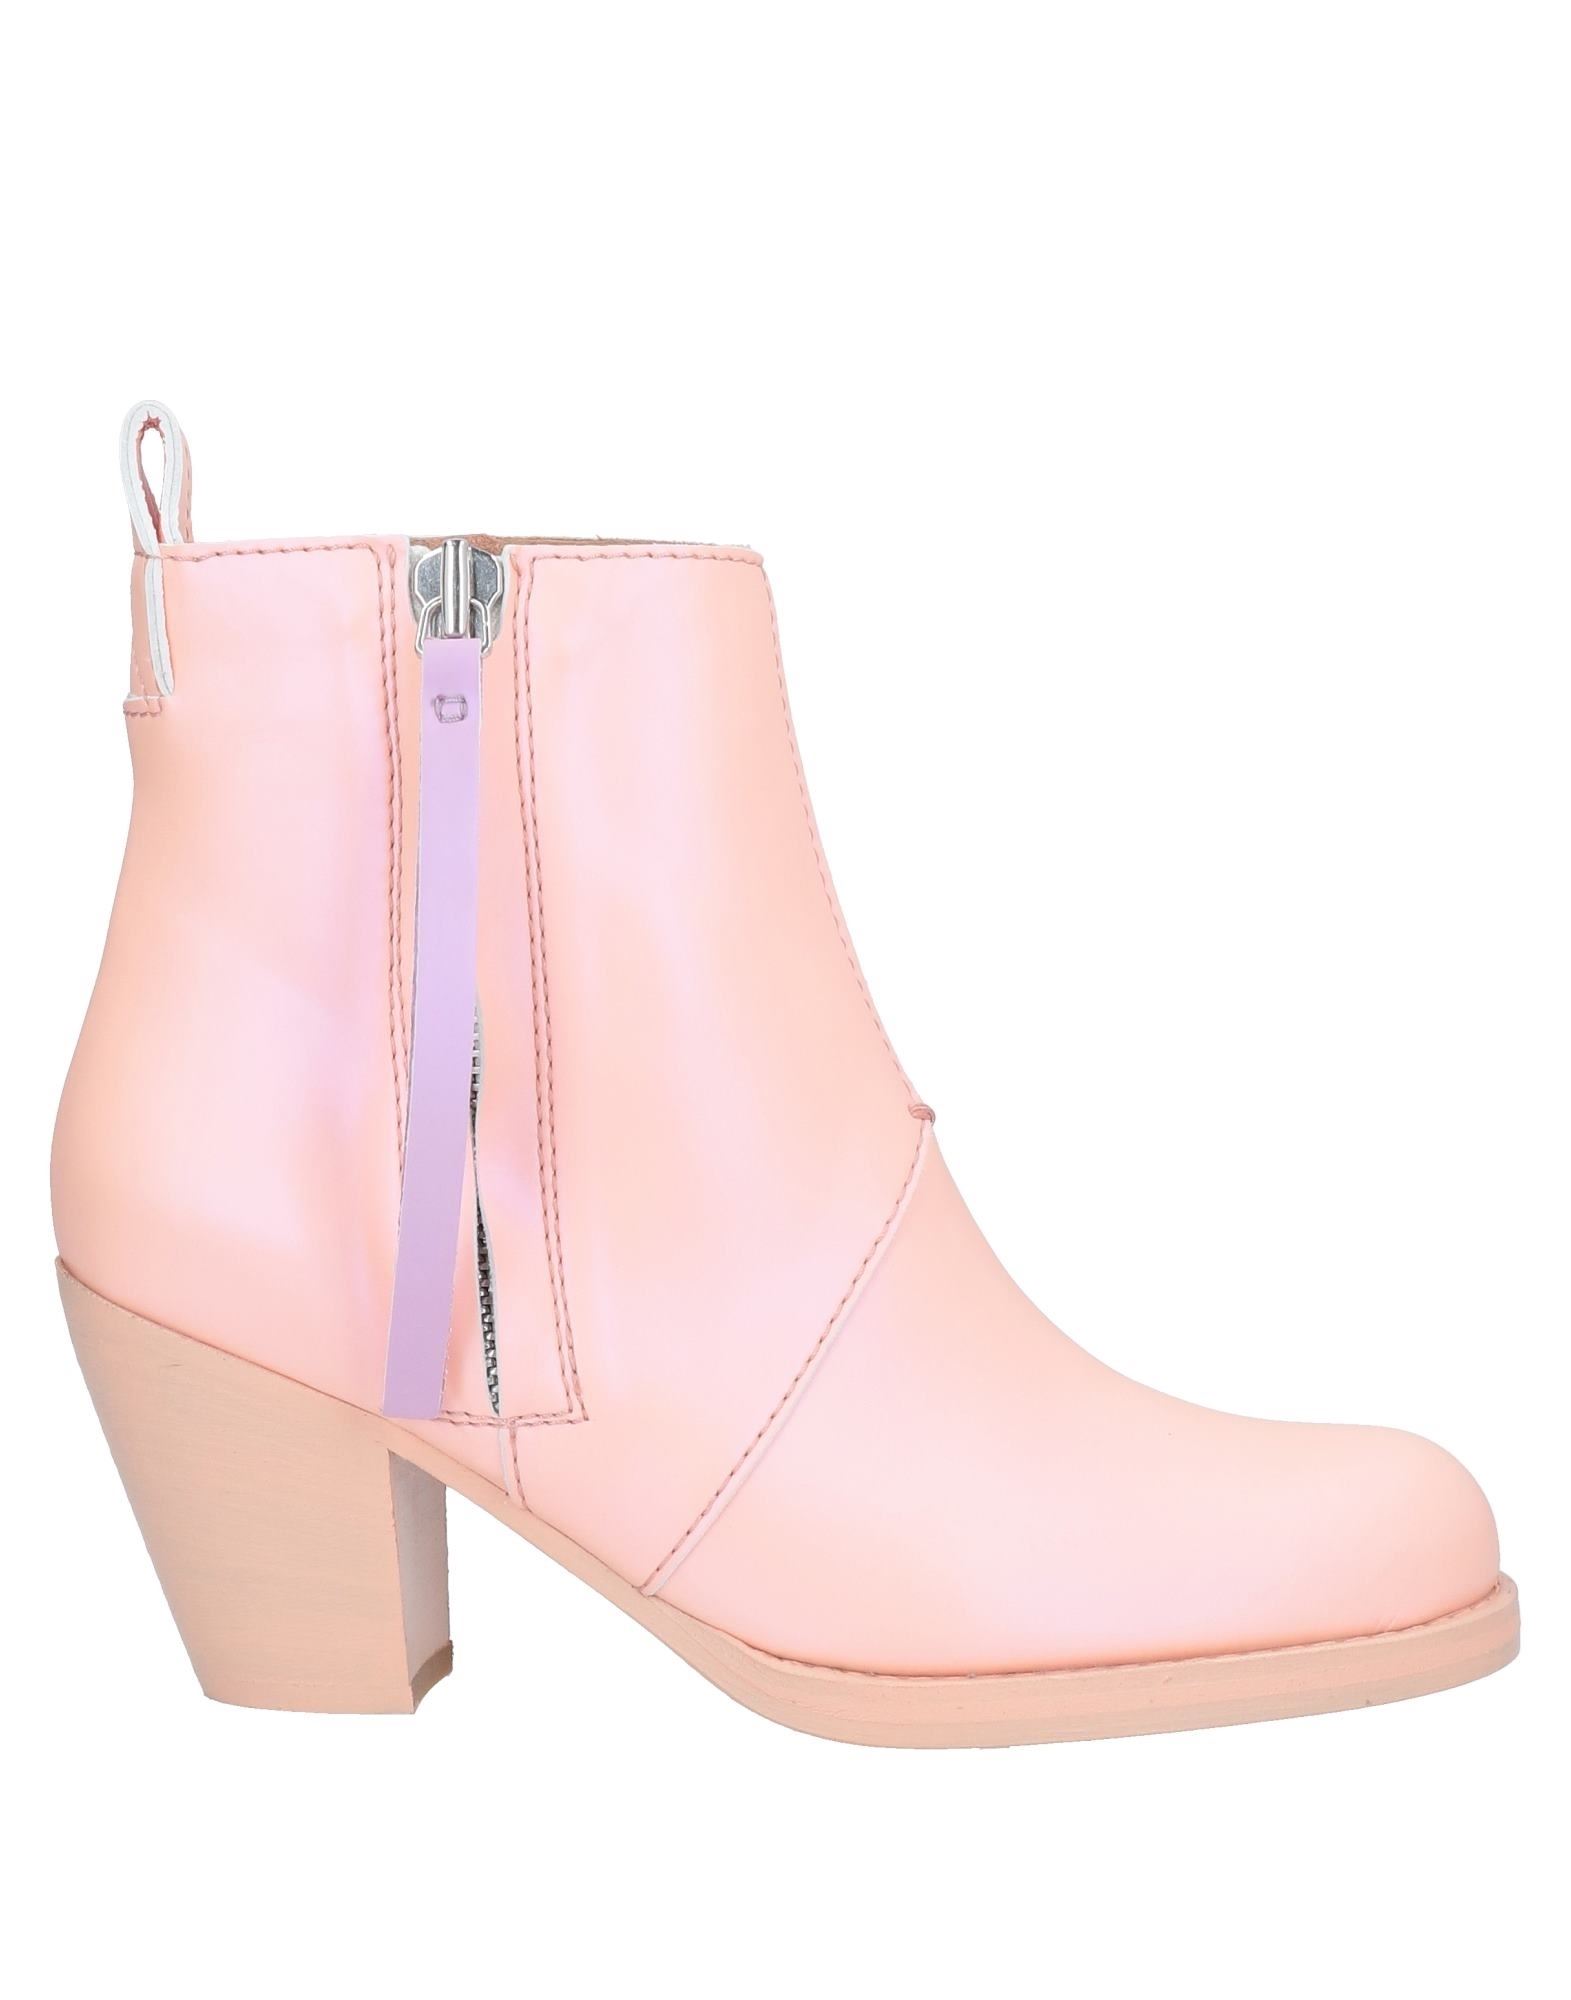 Acne Studios Ankle Boots In Salmon Pink